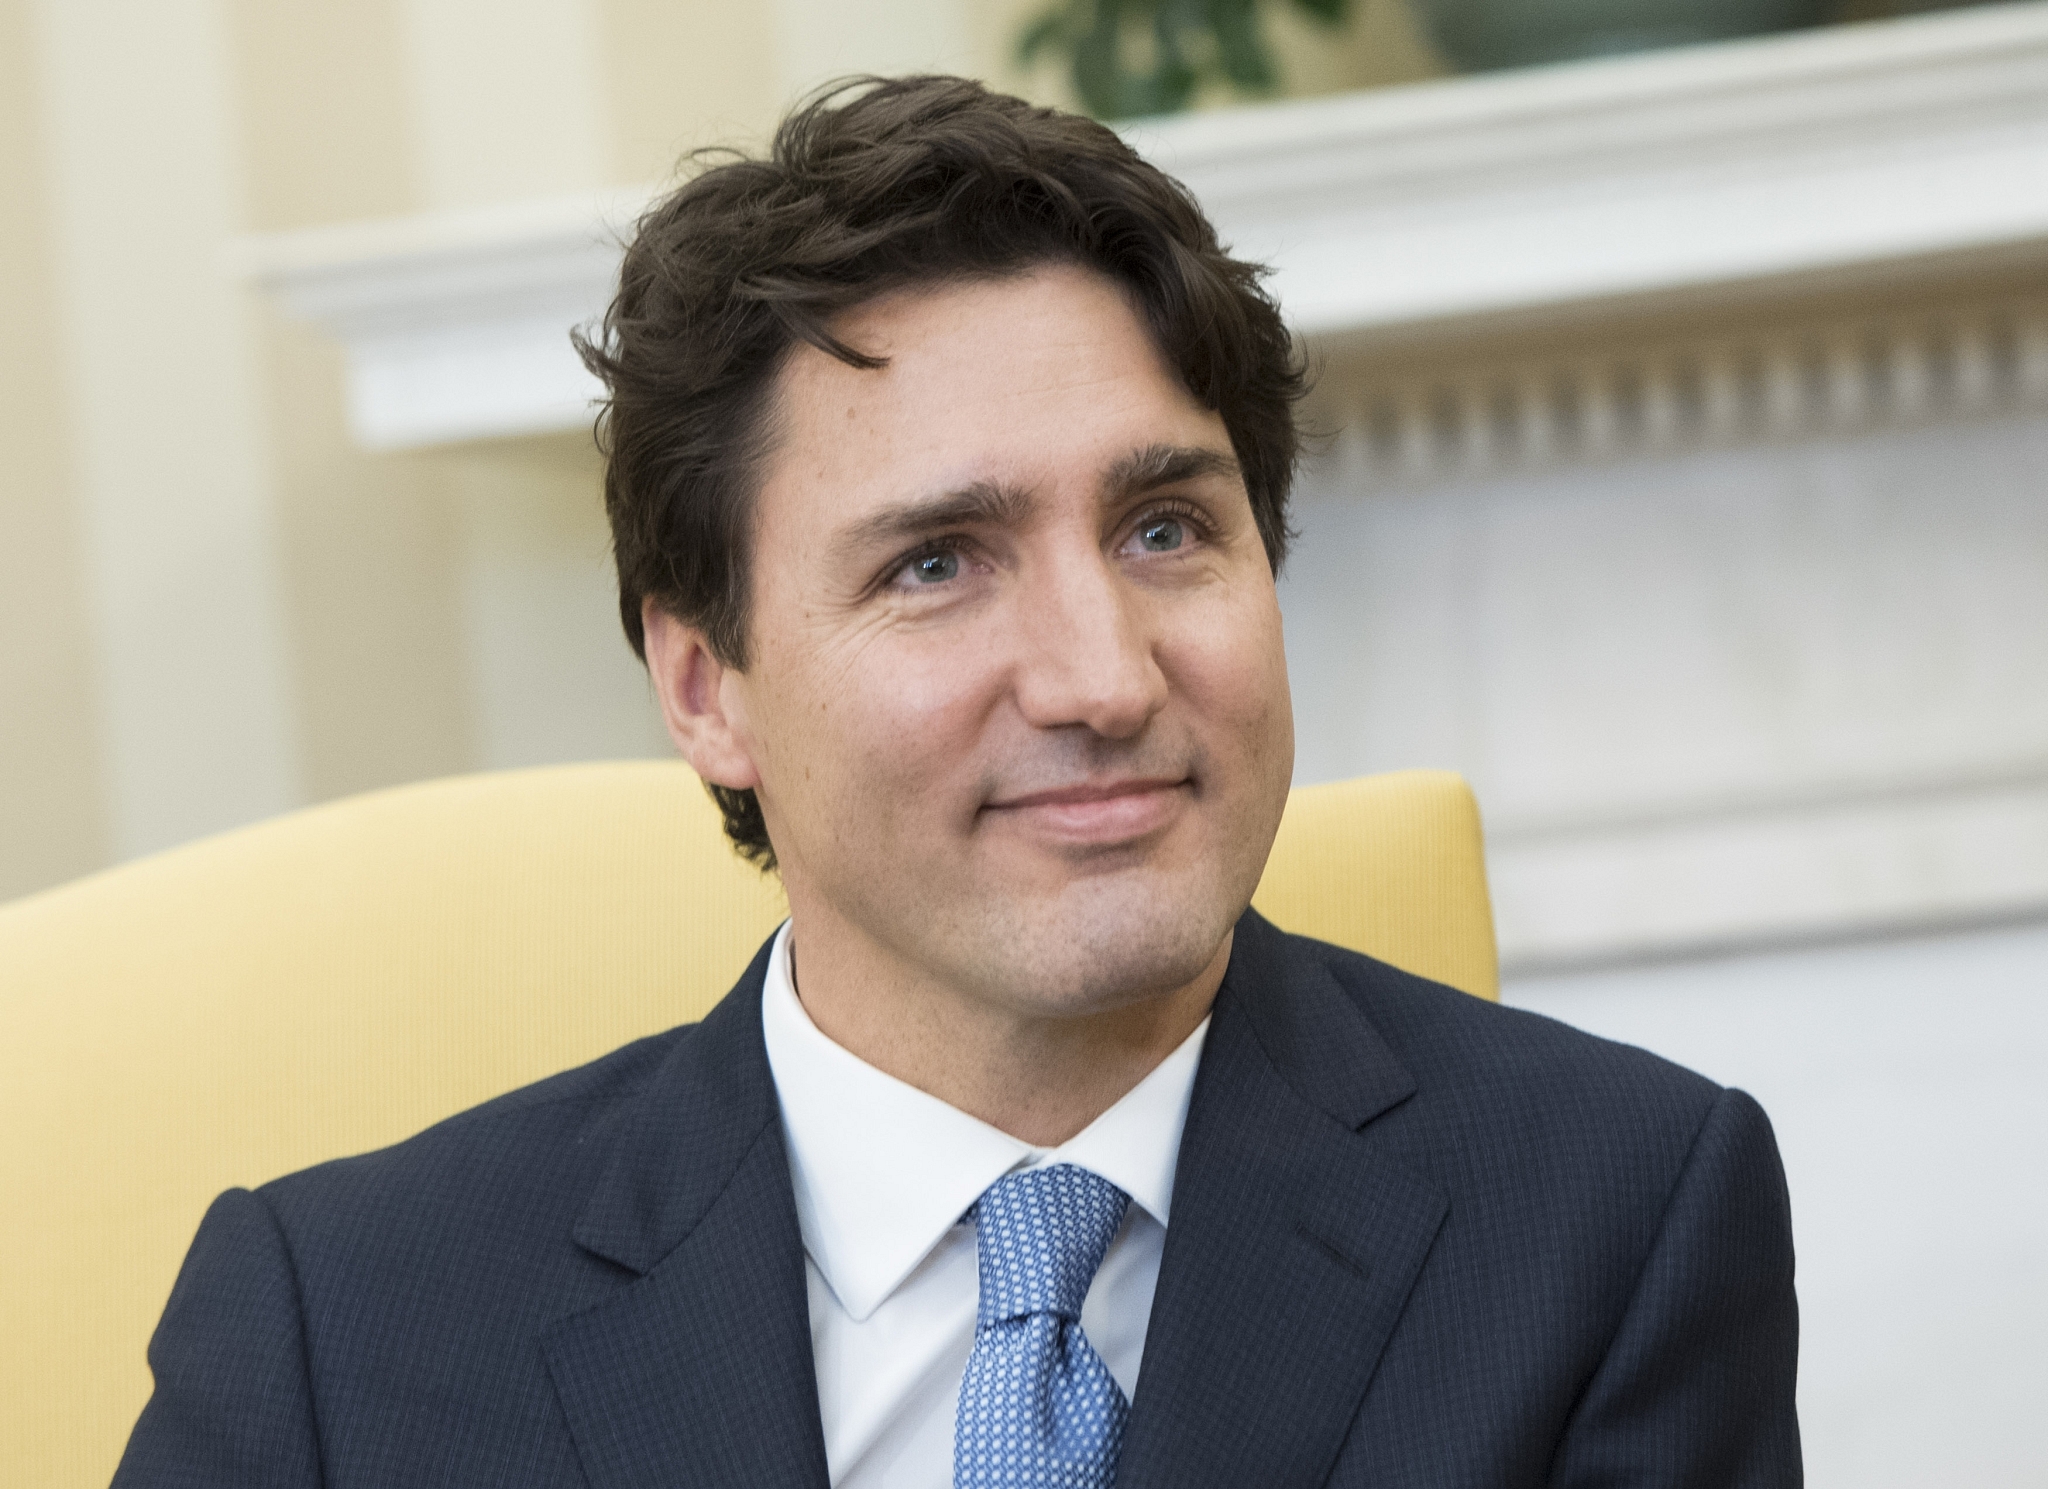 Canadian Prime Minister Justin Trudeau (Kevin Dietsch-Pool/Getty Images)